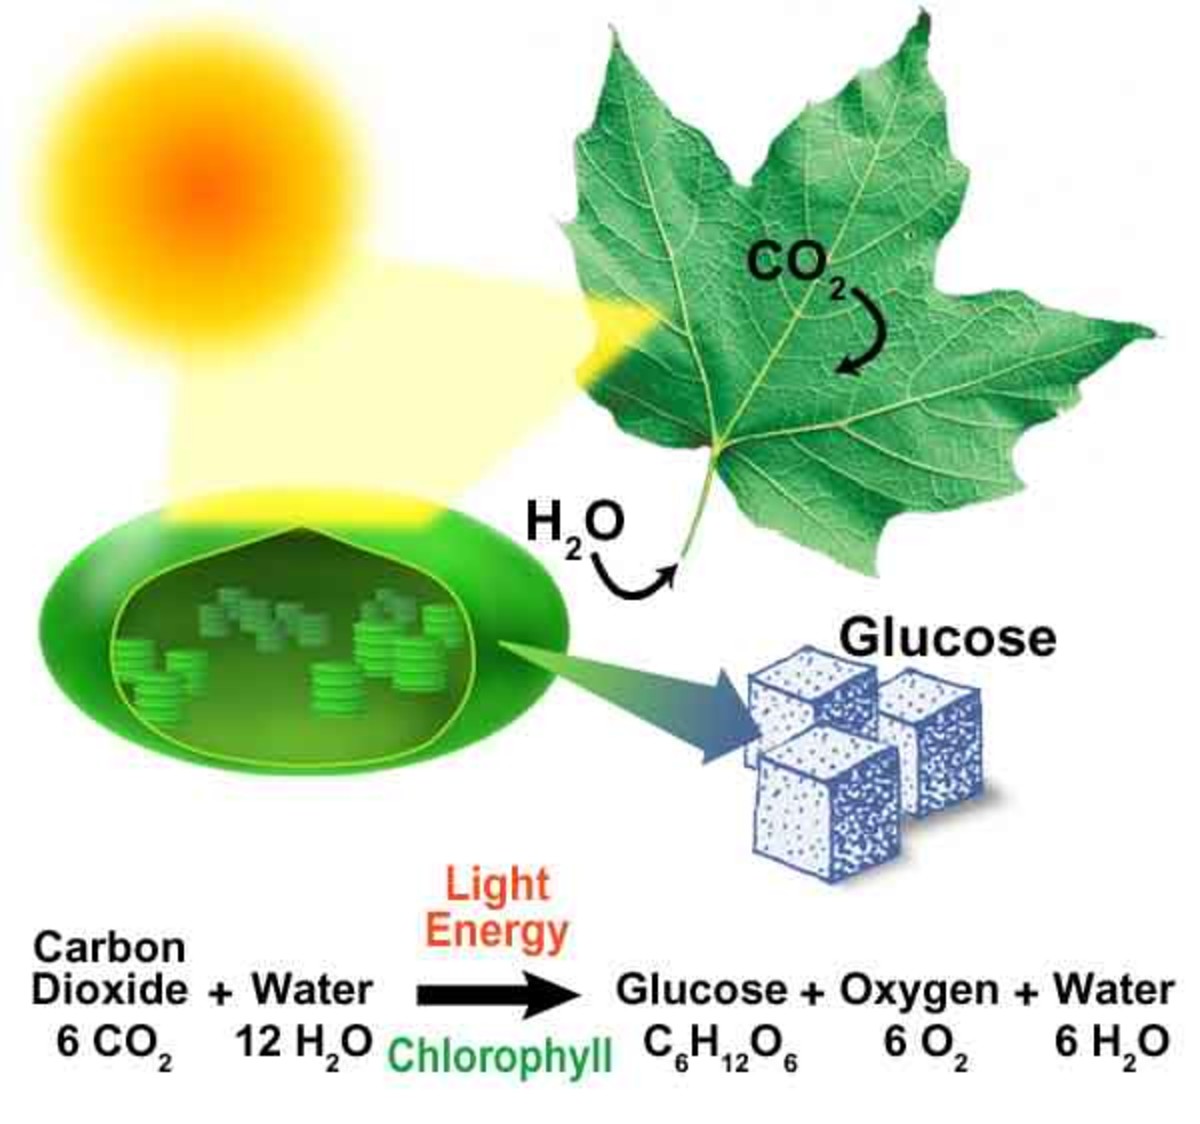 What is the balanced chemical equation for photosynthesis?